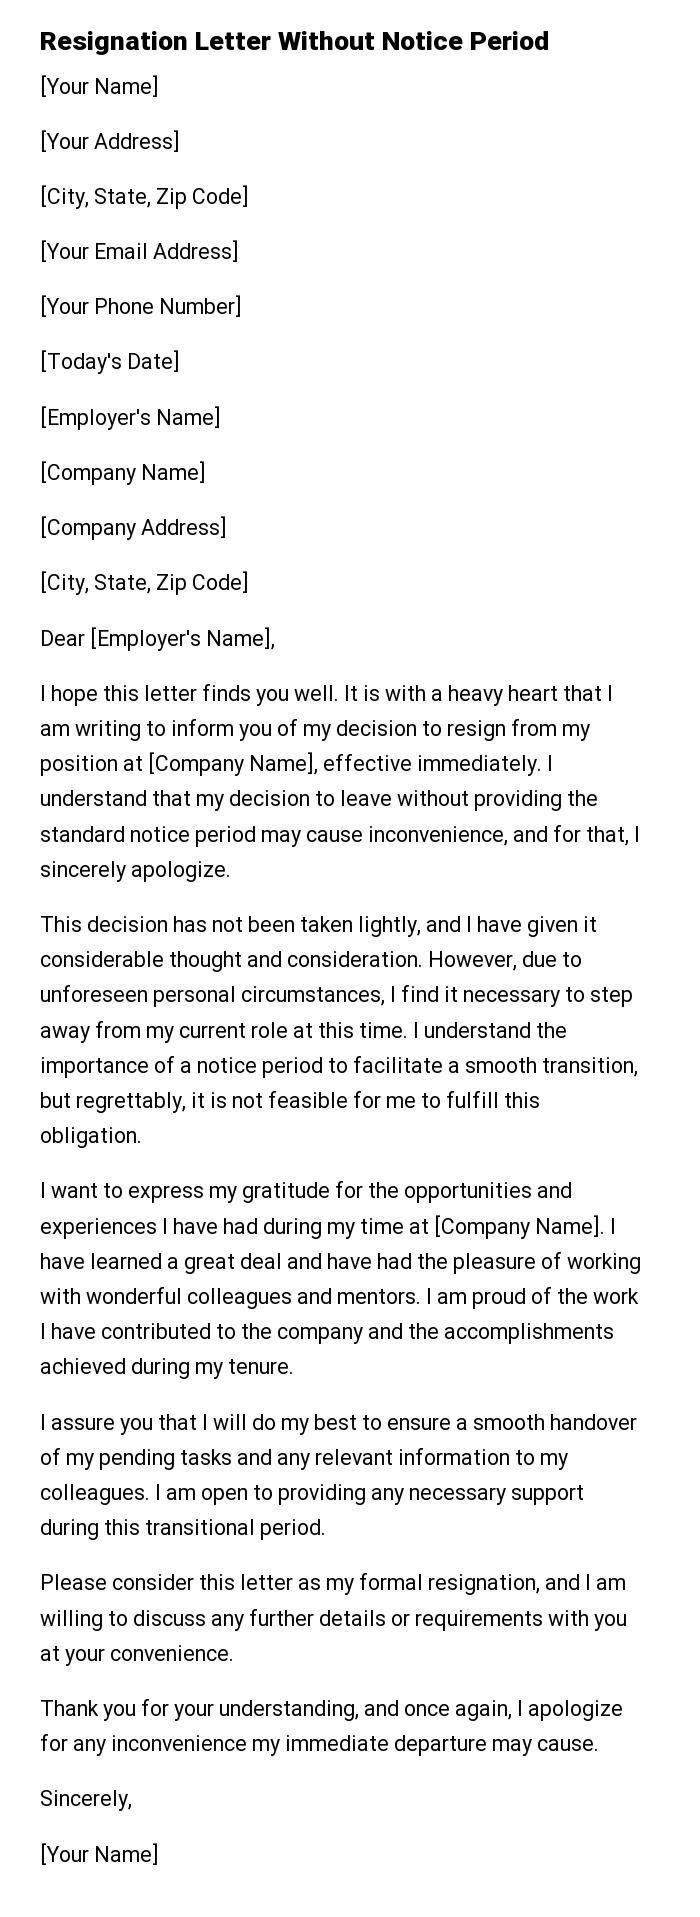 Resignation Letter Without Notice Period